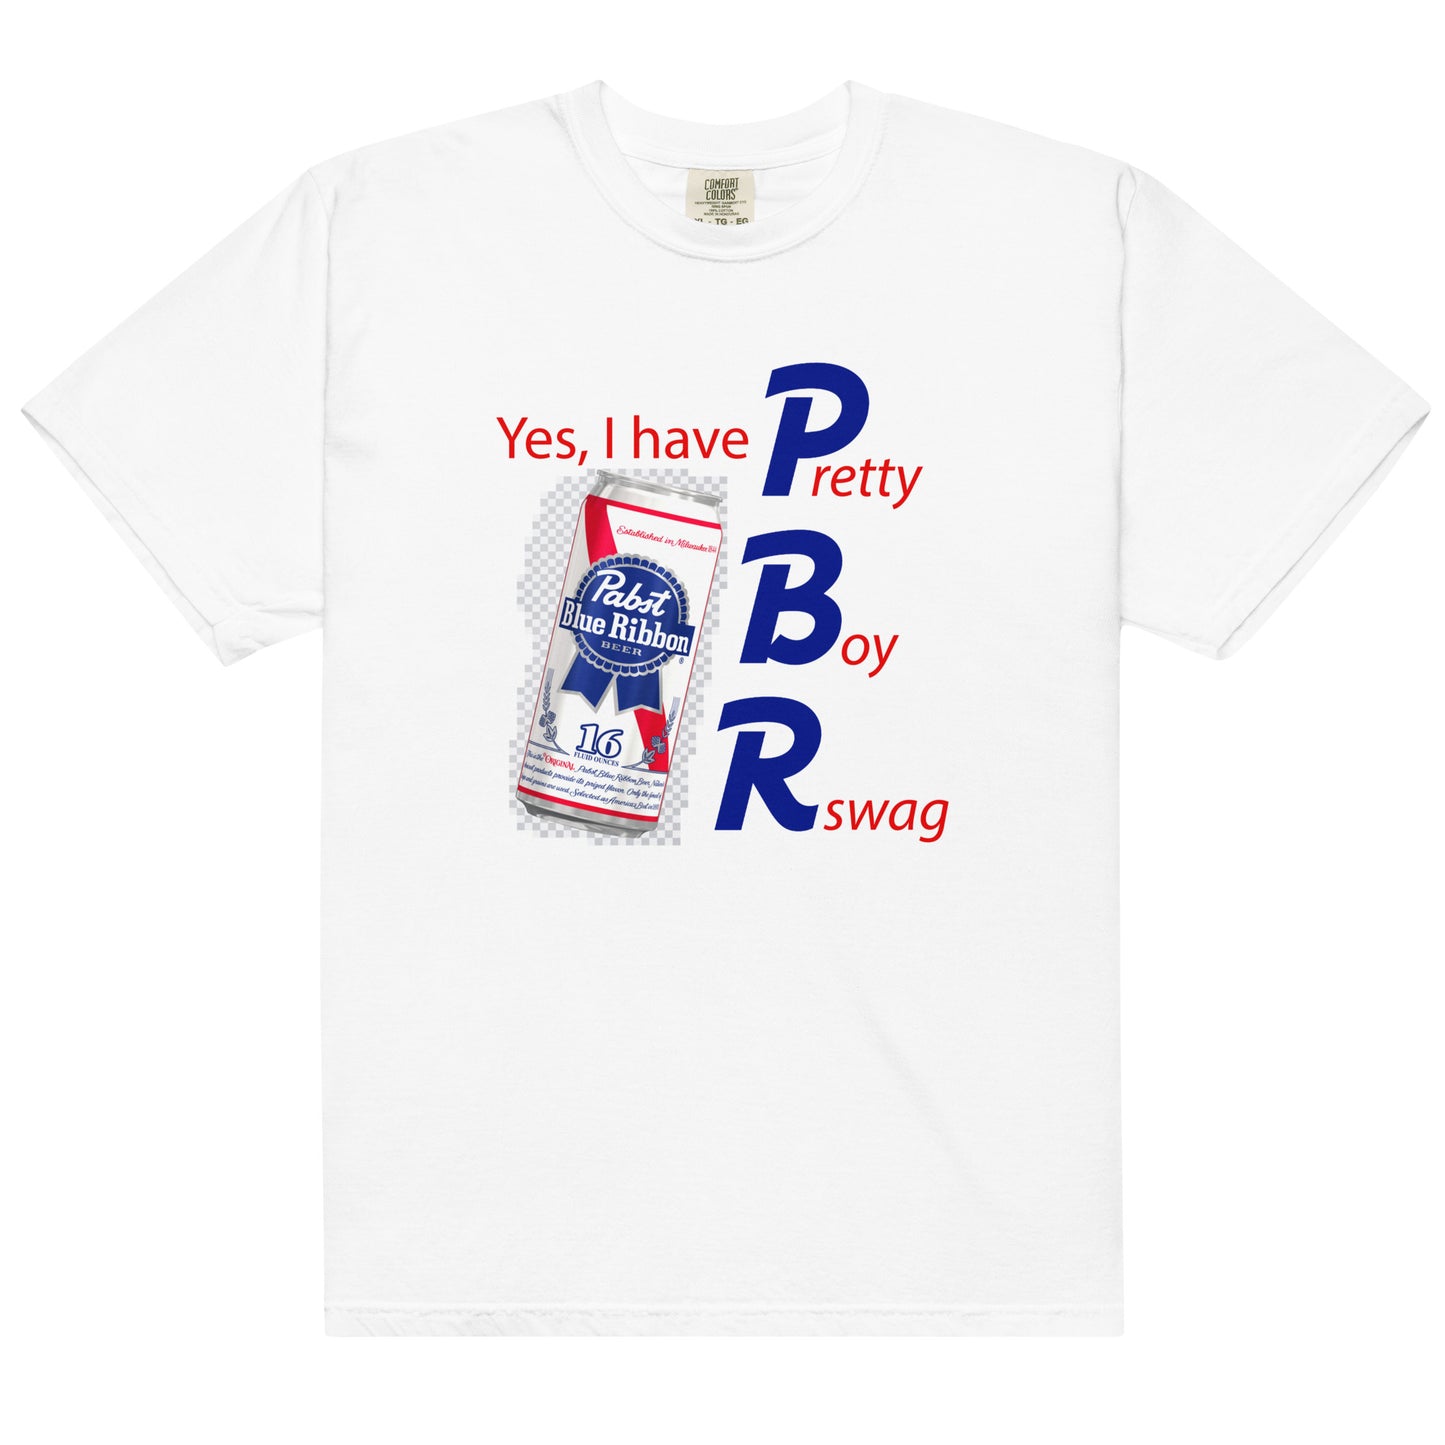 Yes, I Have PBR.